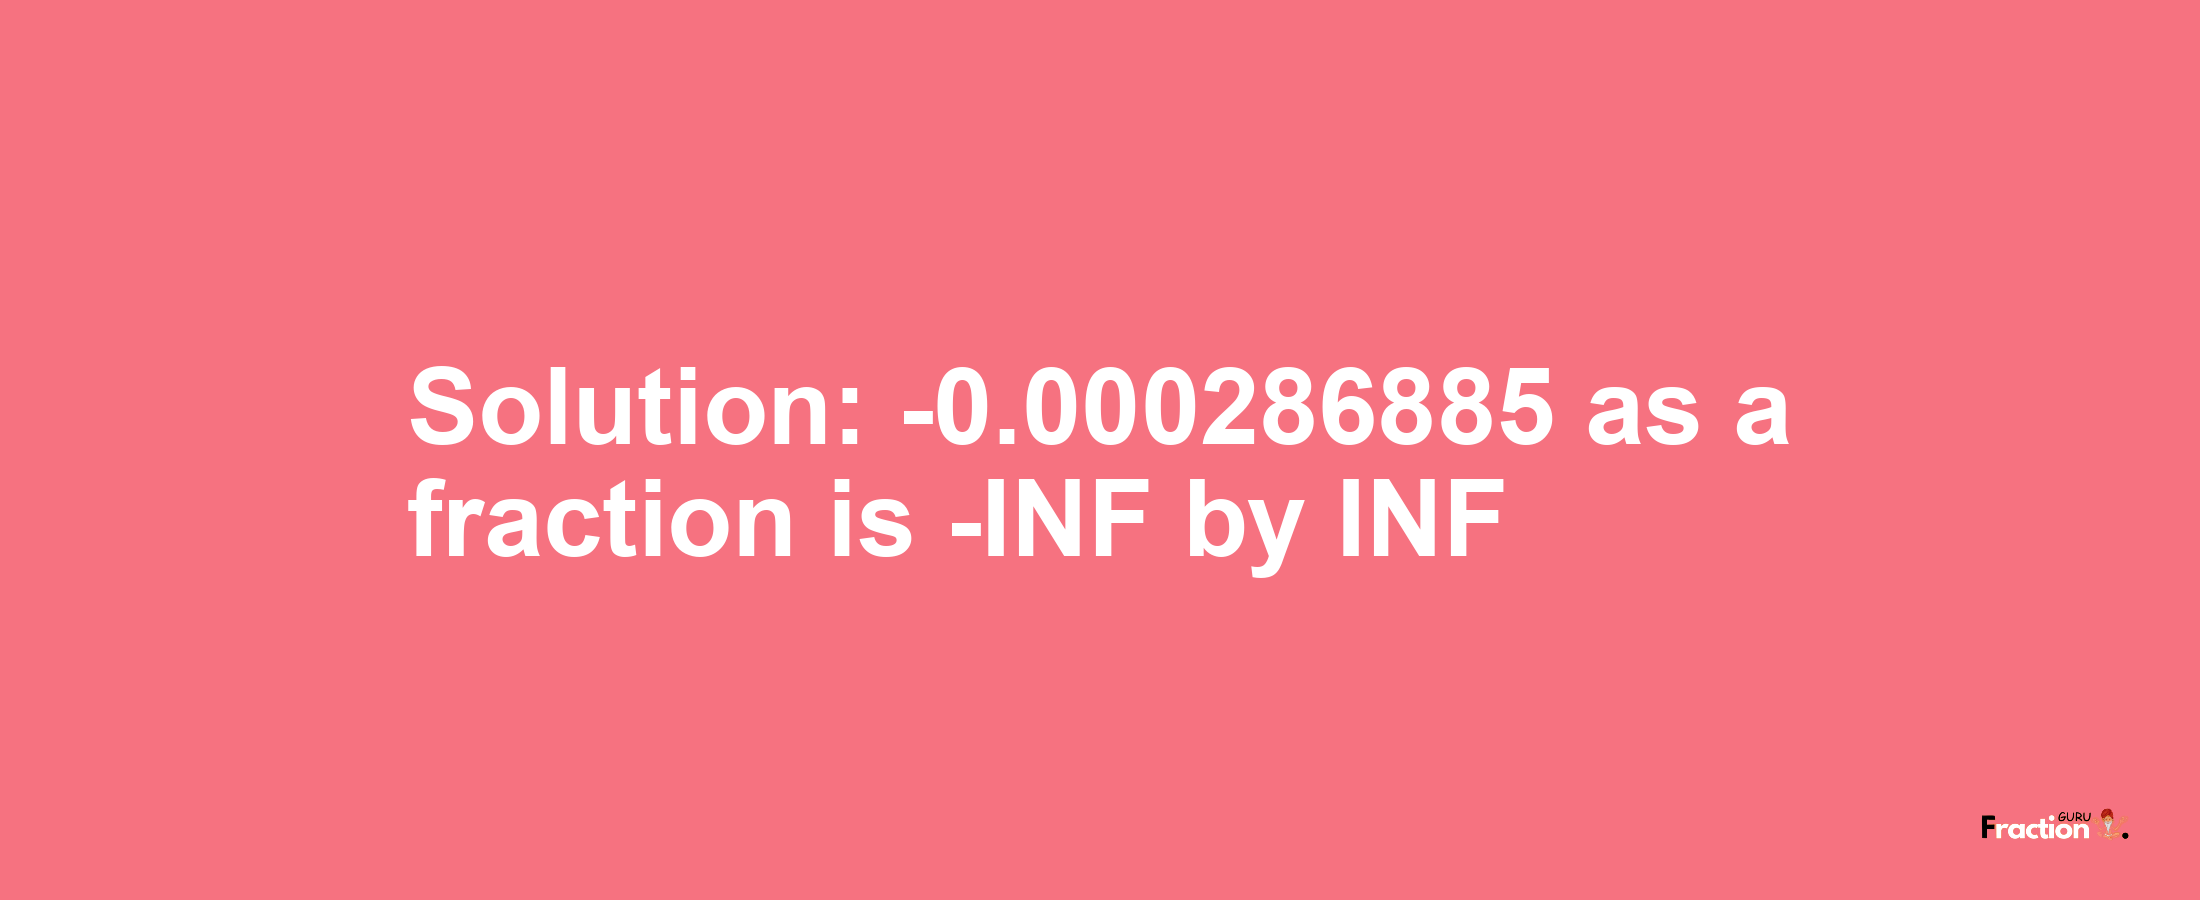 Solution:-0.000286885 as a fraction is -INF/INF